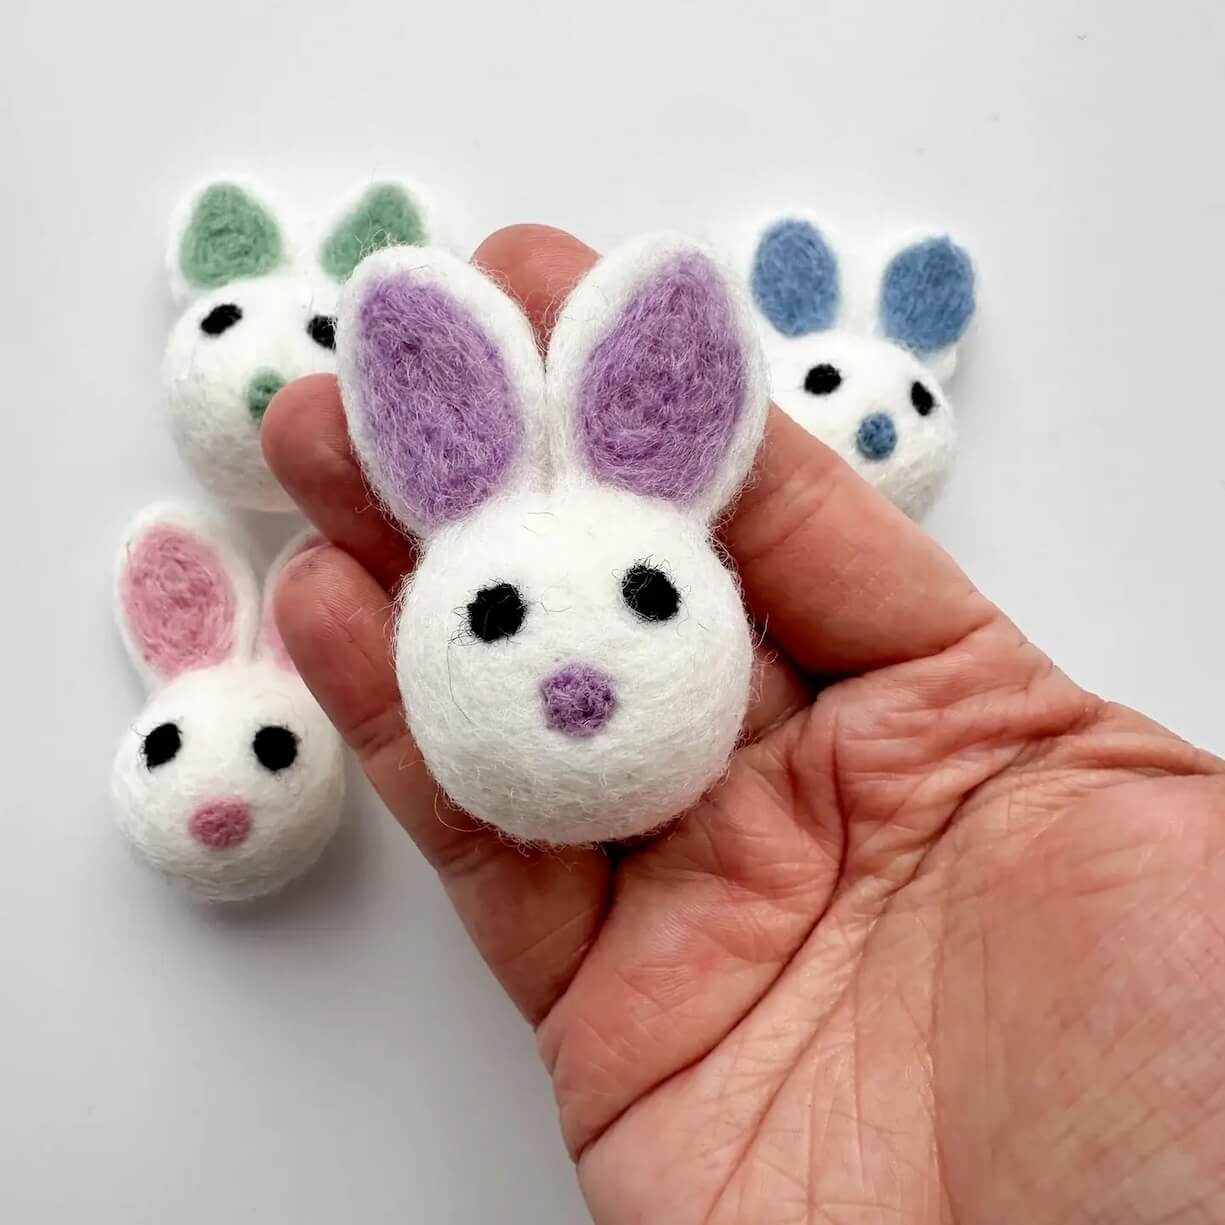 An Easter bunny felted wool cat toy being held in someone's hand to show size and scale.